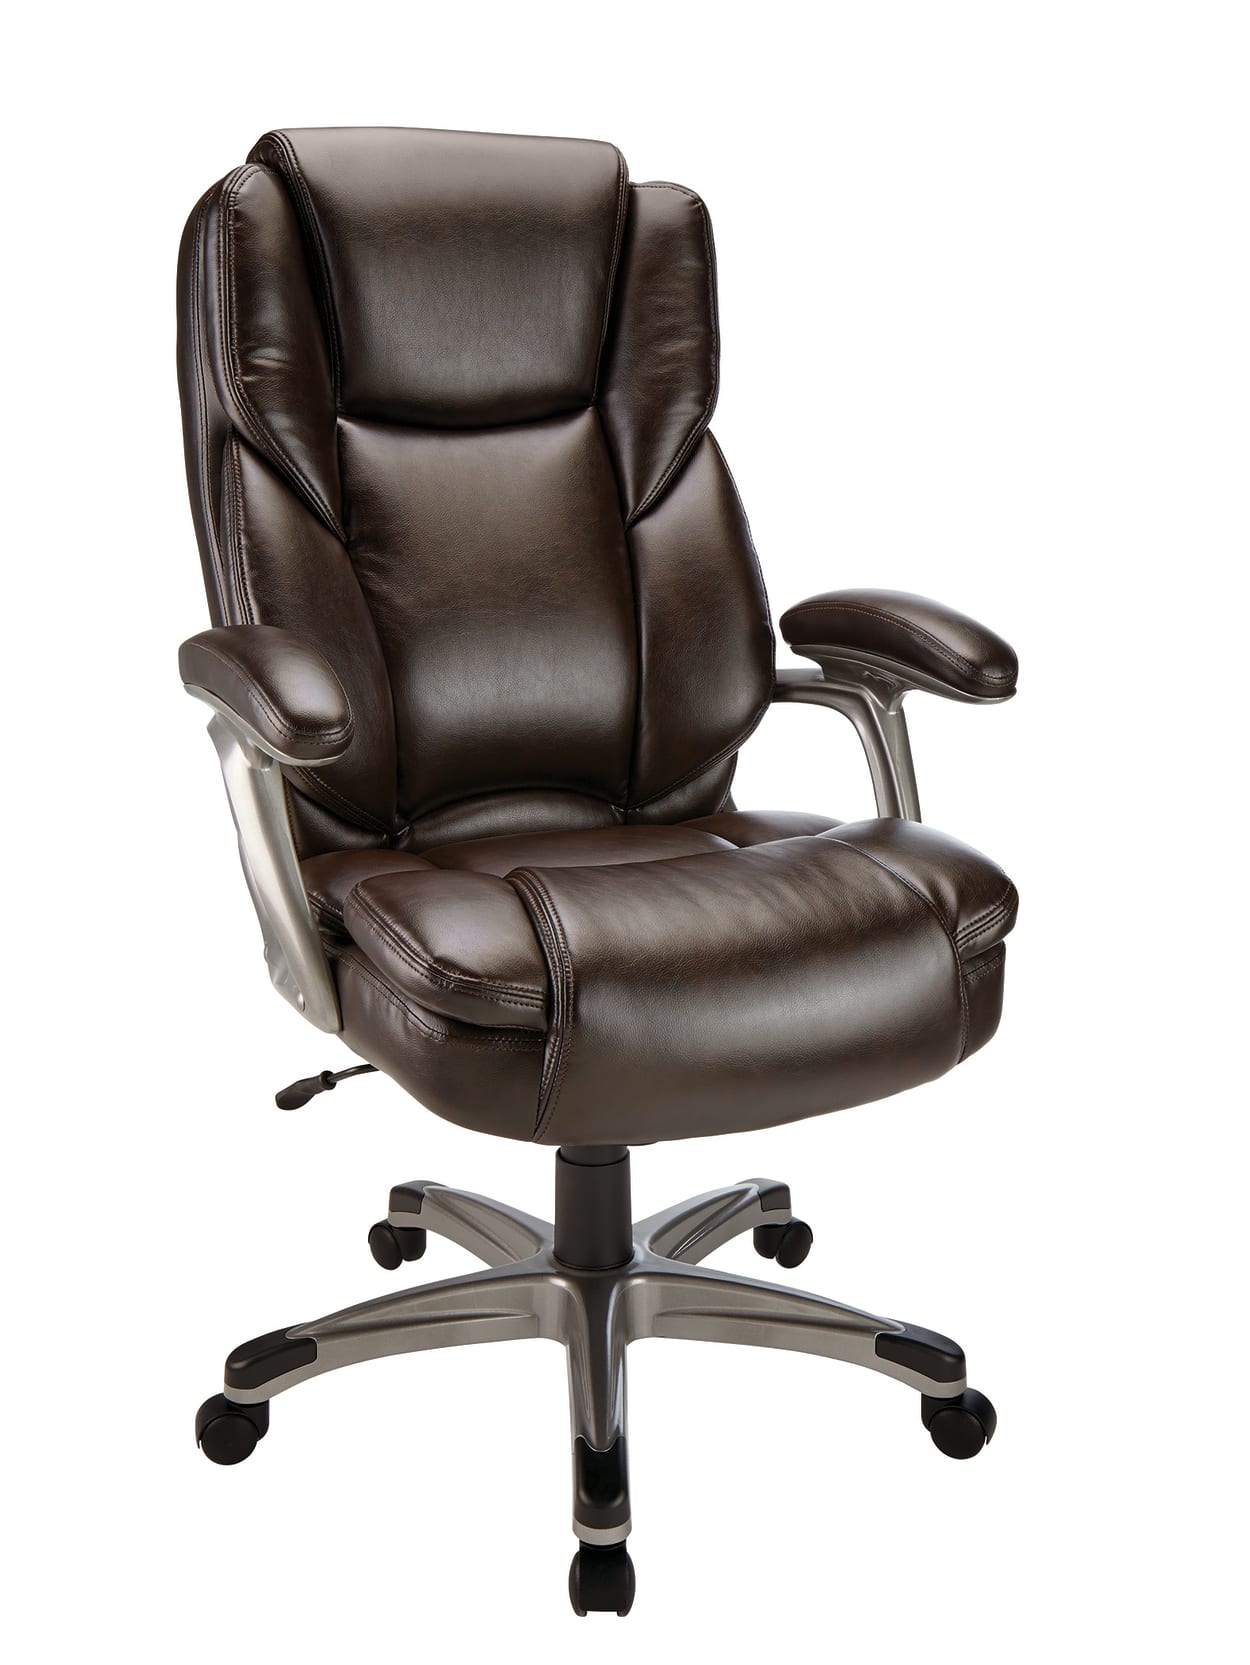 Realspace Cressfield Chair Brown, High Back Desk Chair Leather